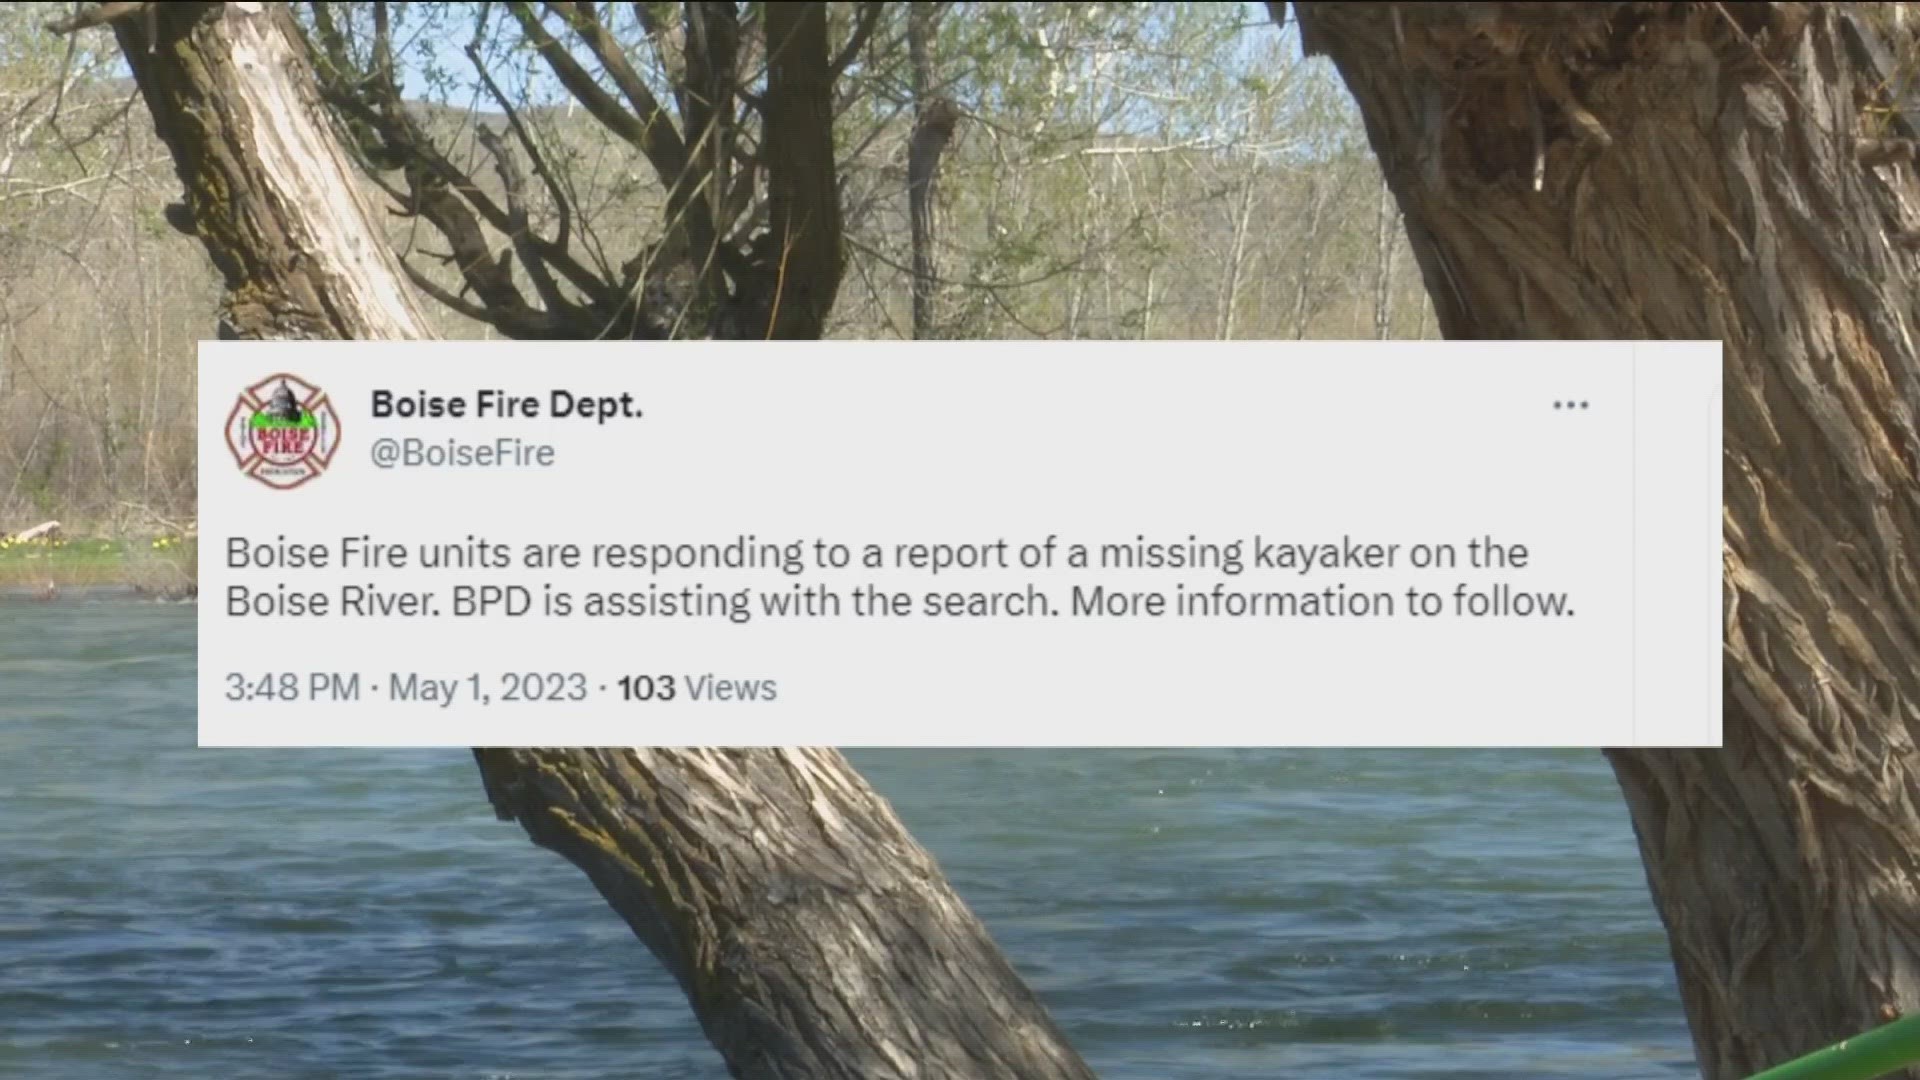 The kayaker has not been found at this time. Officials remind people that there is a "Dangerous River Condition" in effect.